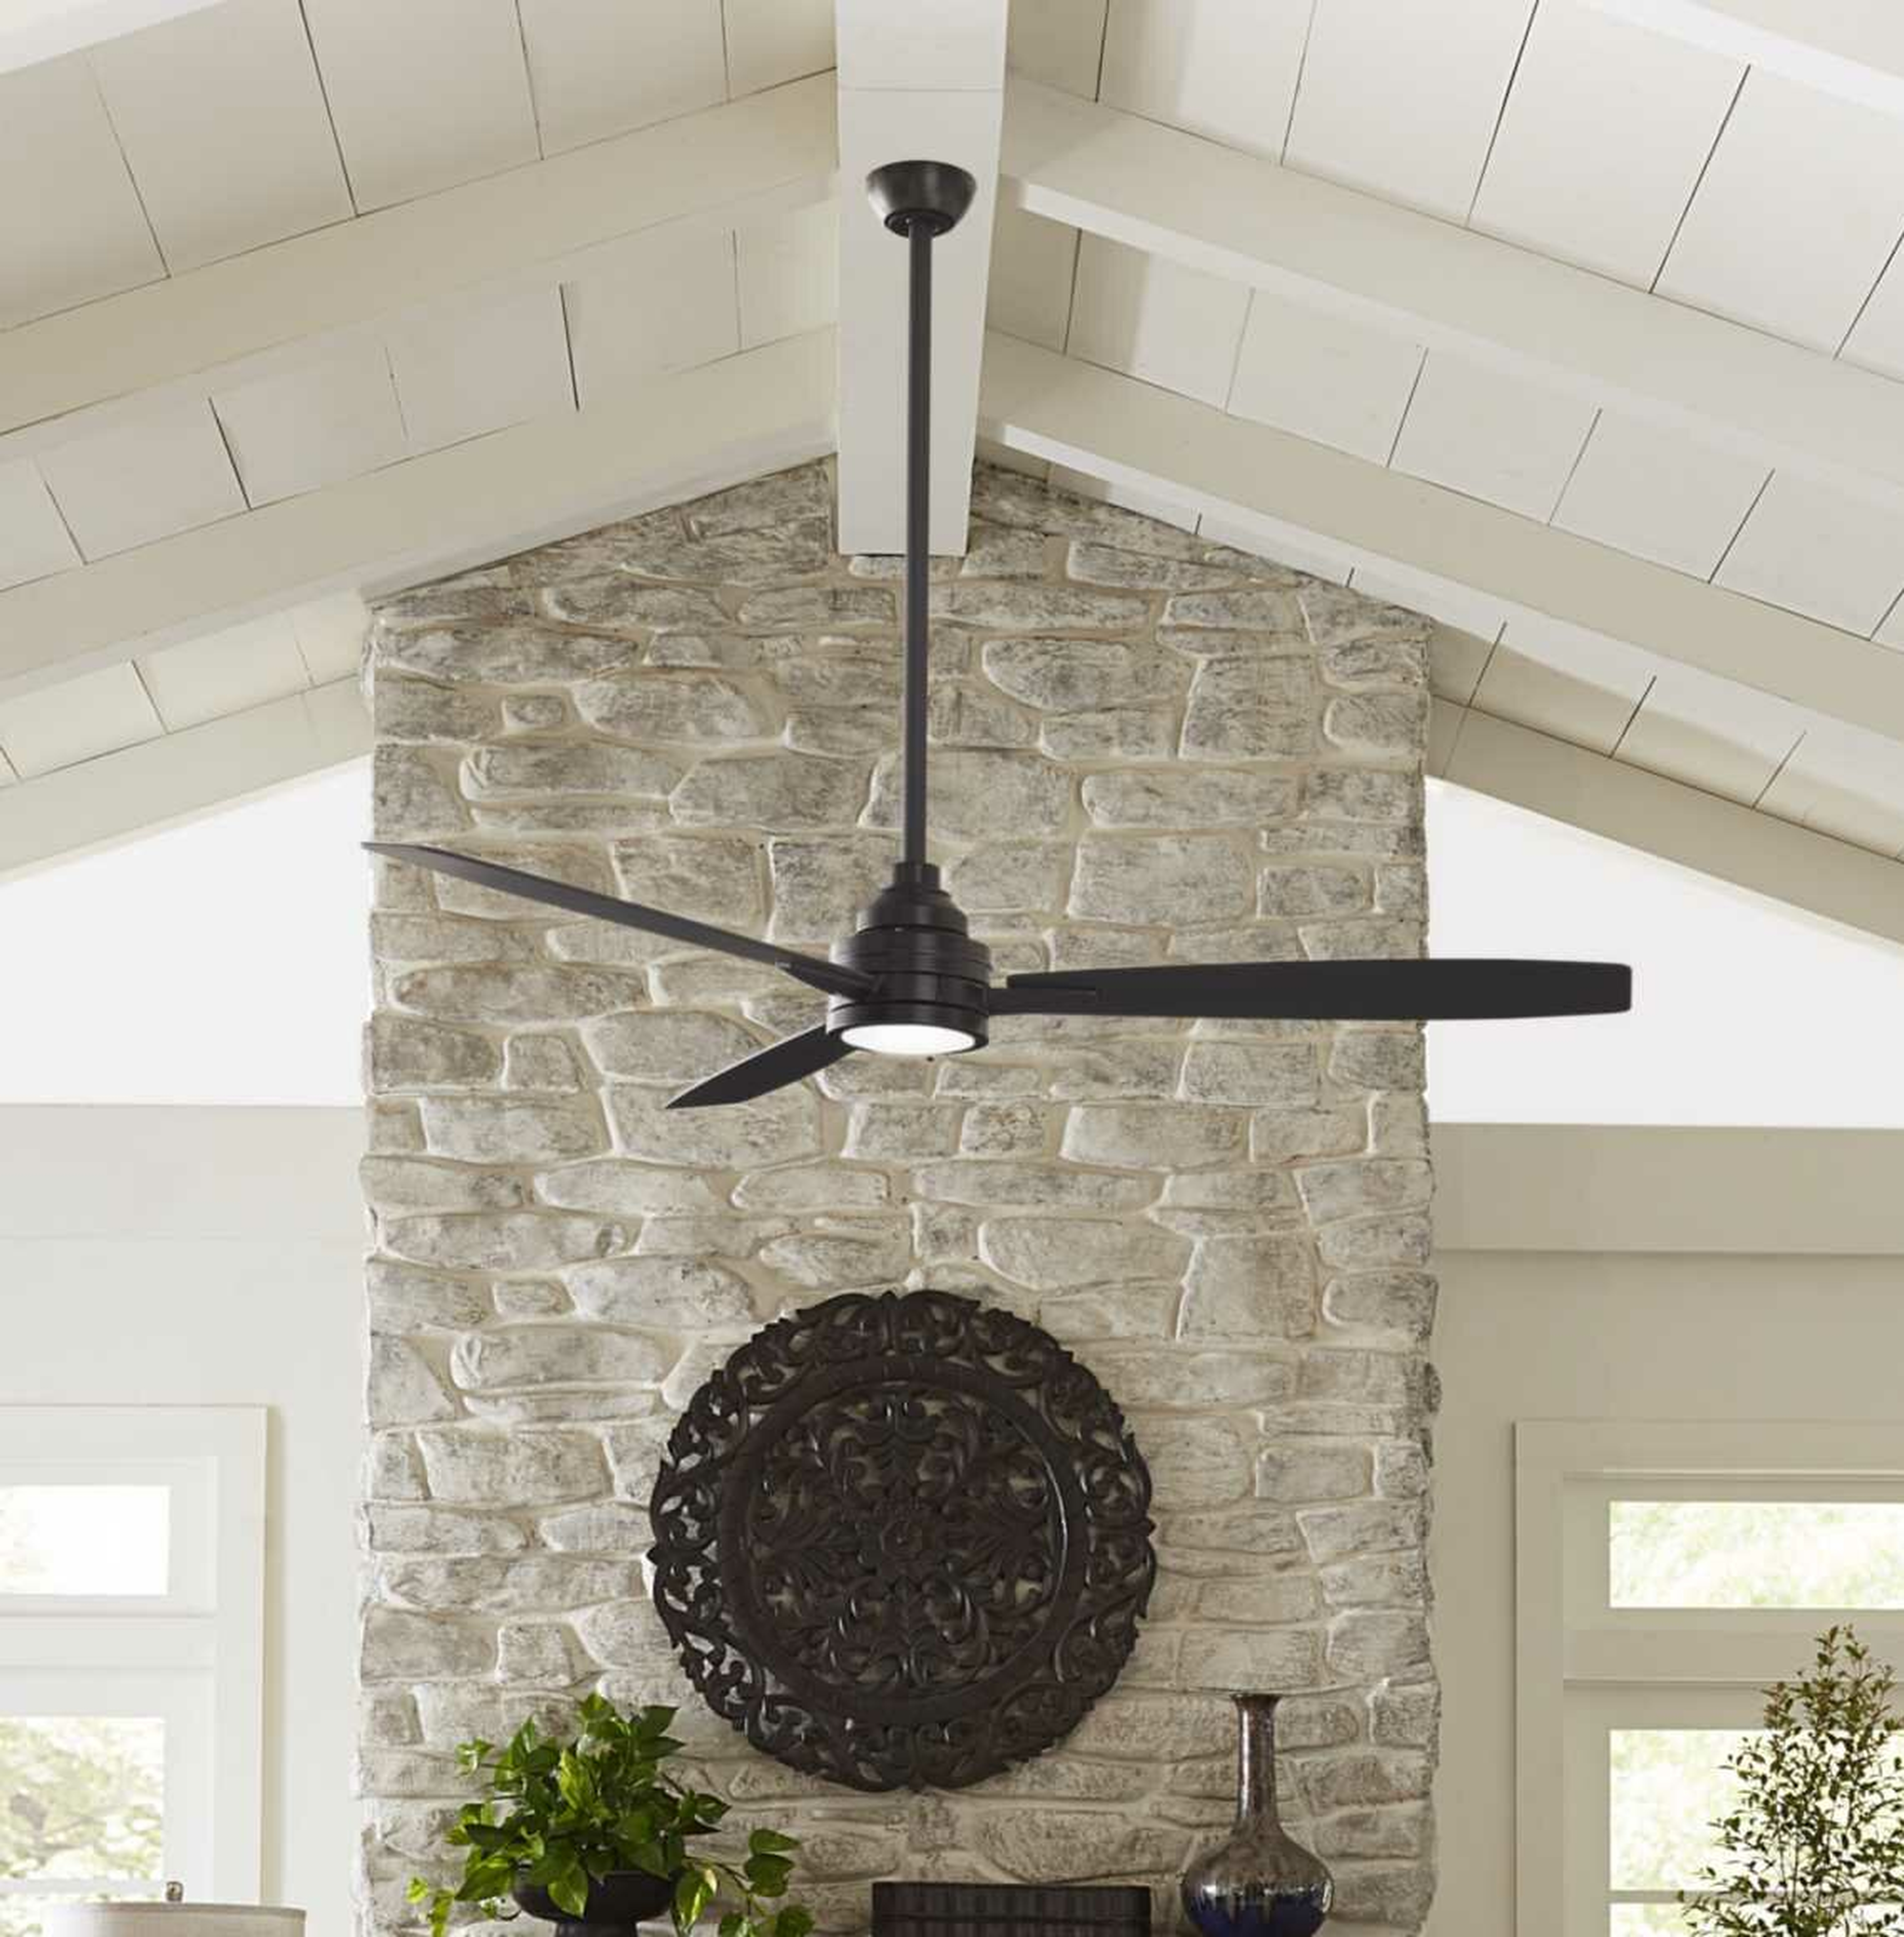 60" Brumfield 3 - Blade Standard Ceiling Fan with Remote Control and Light Kit Included - Wayfair